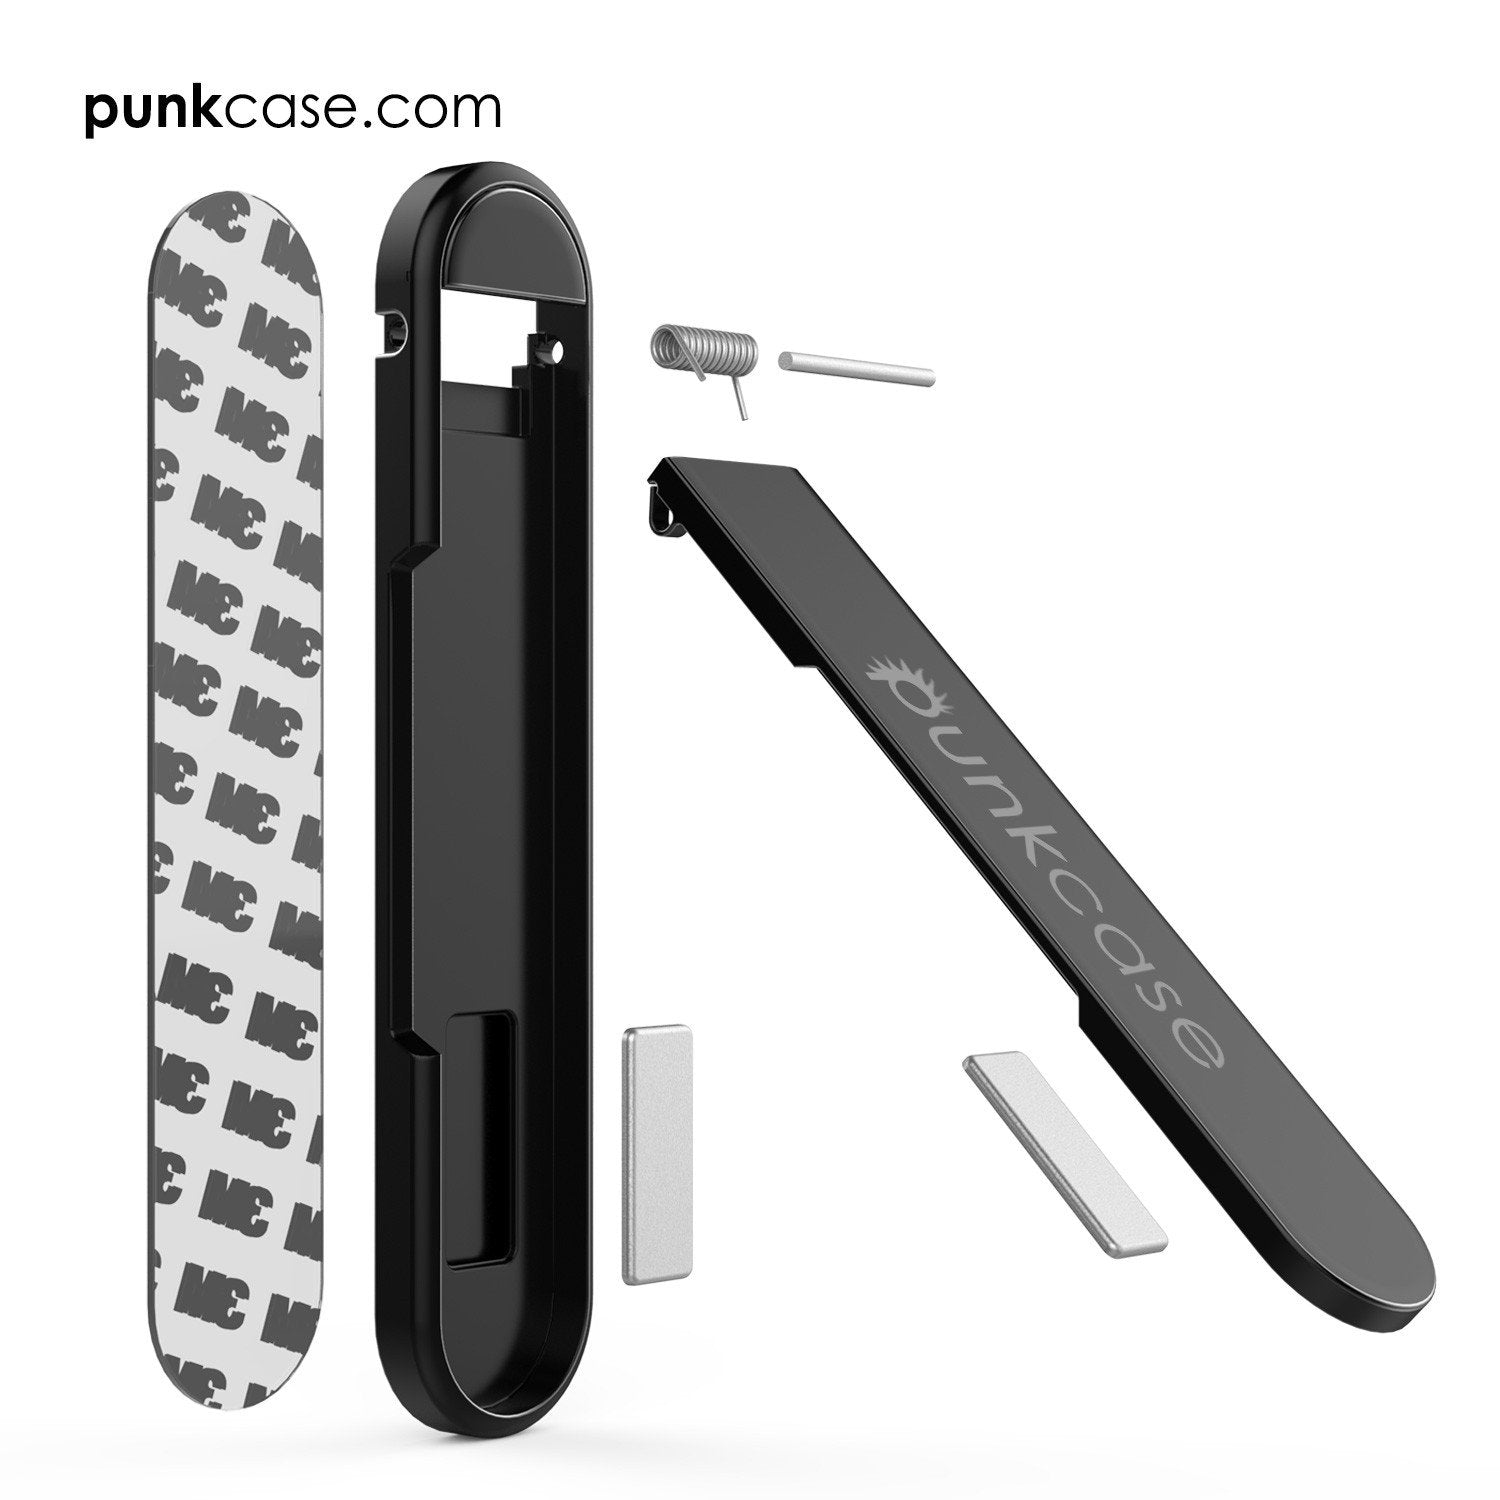 PUNKCASE FlickStick Universal Cell Phone Kickstand for all Mobile Phones & Cases with Flat Backs, One Finger Operation (Black)